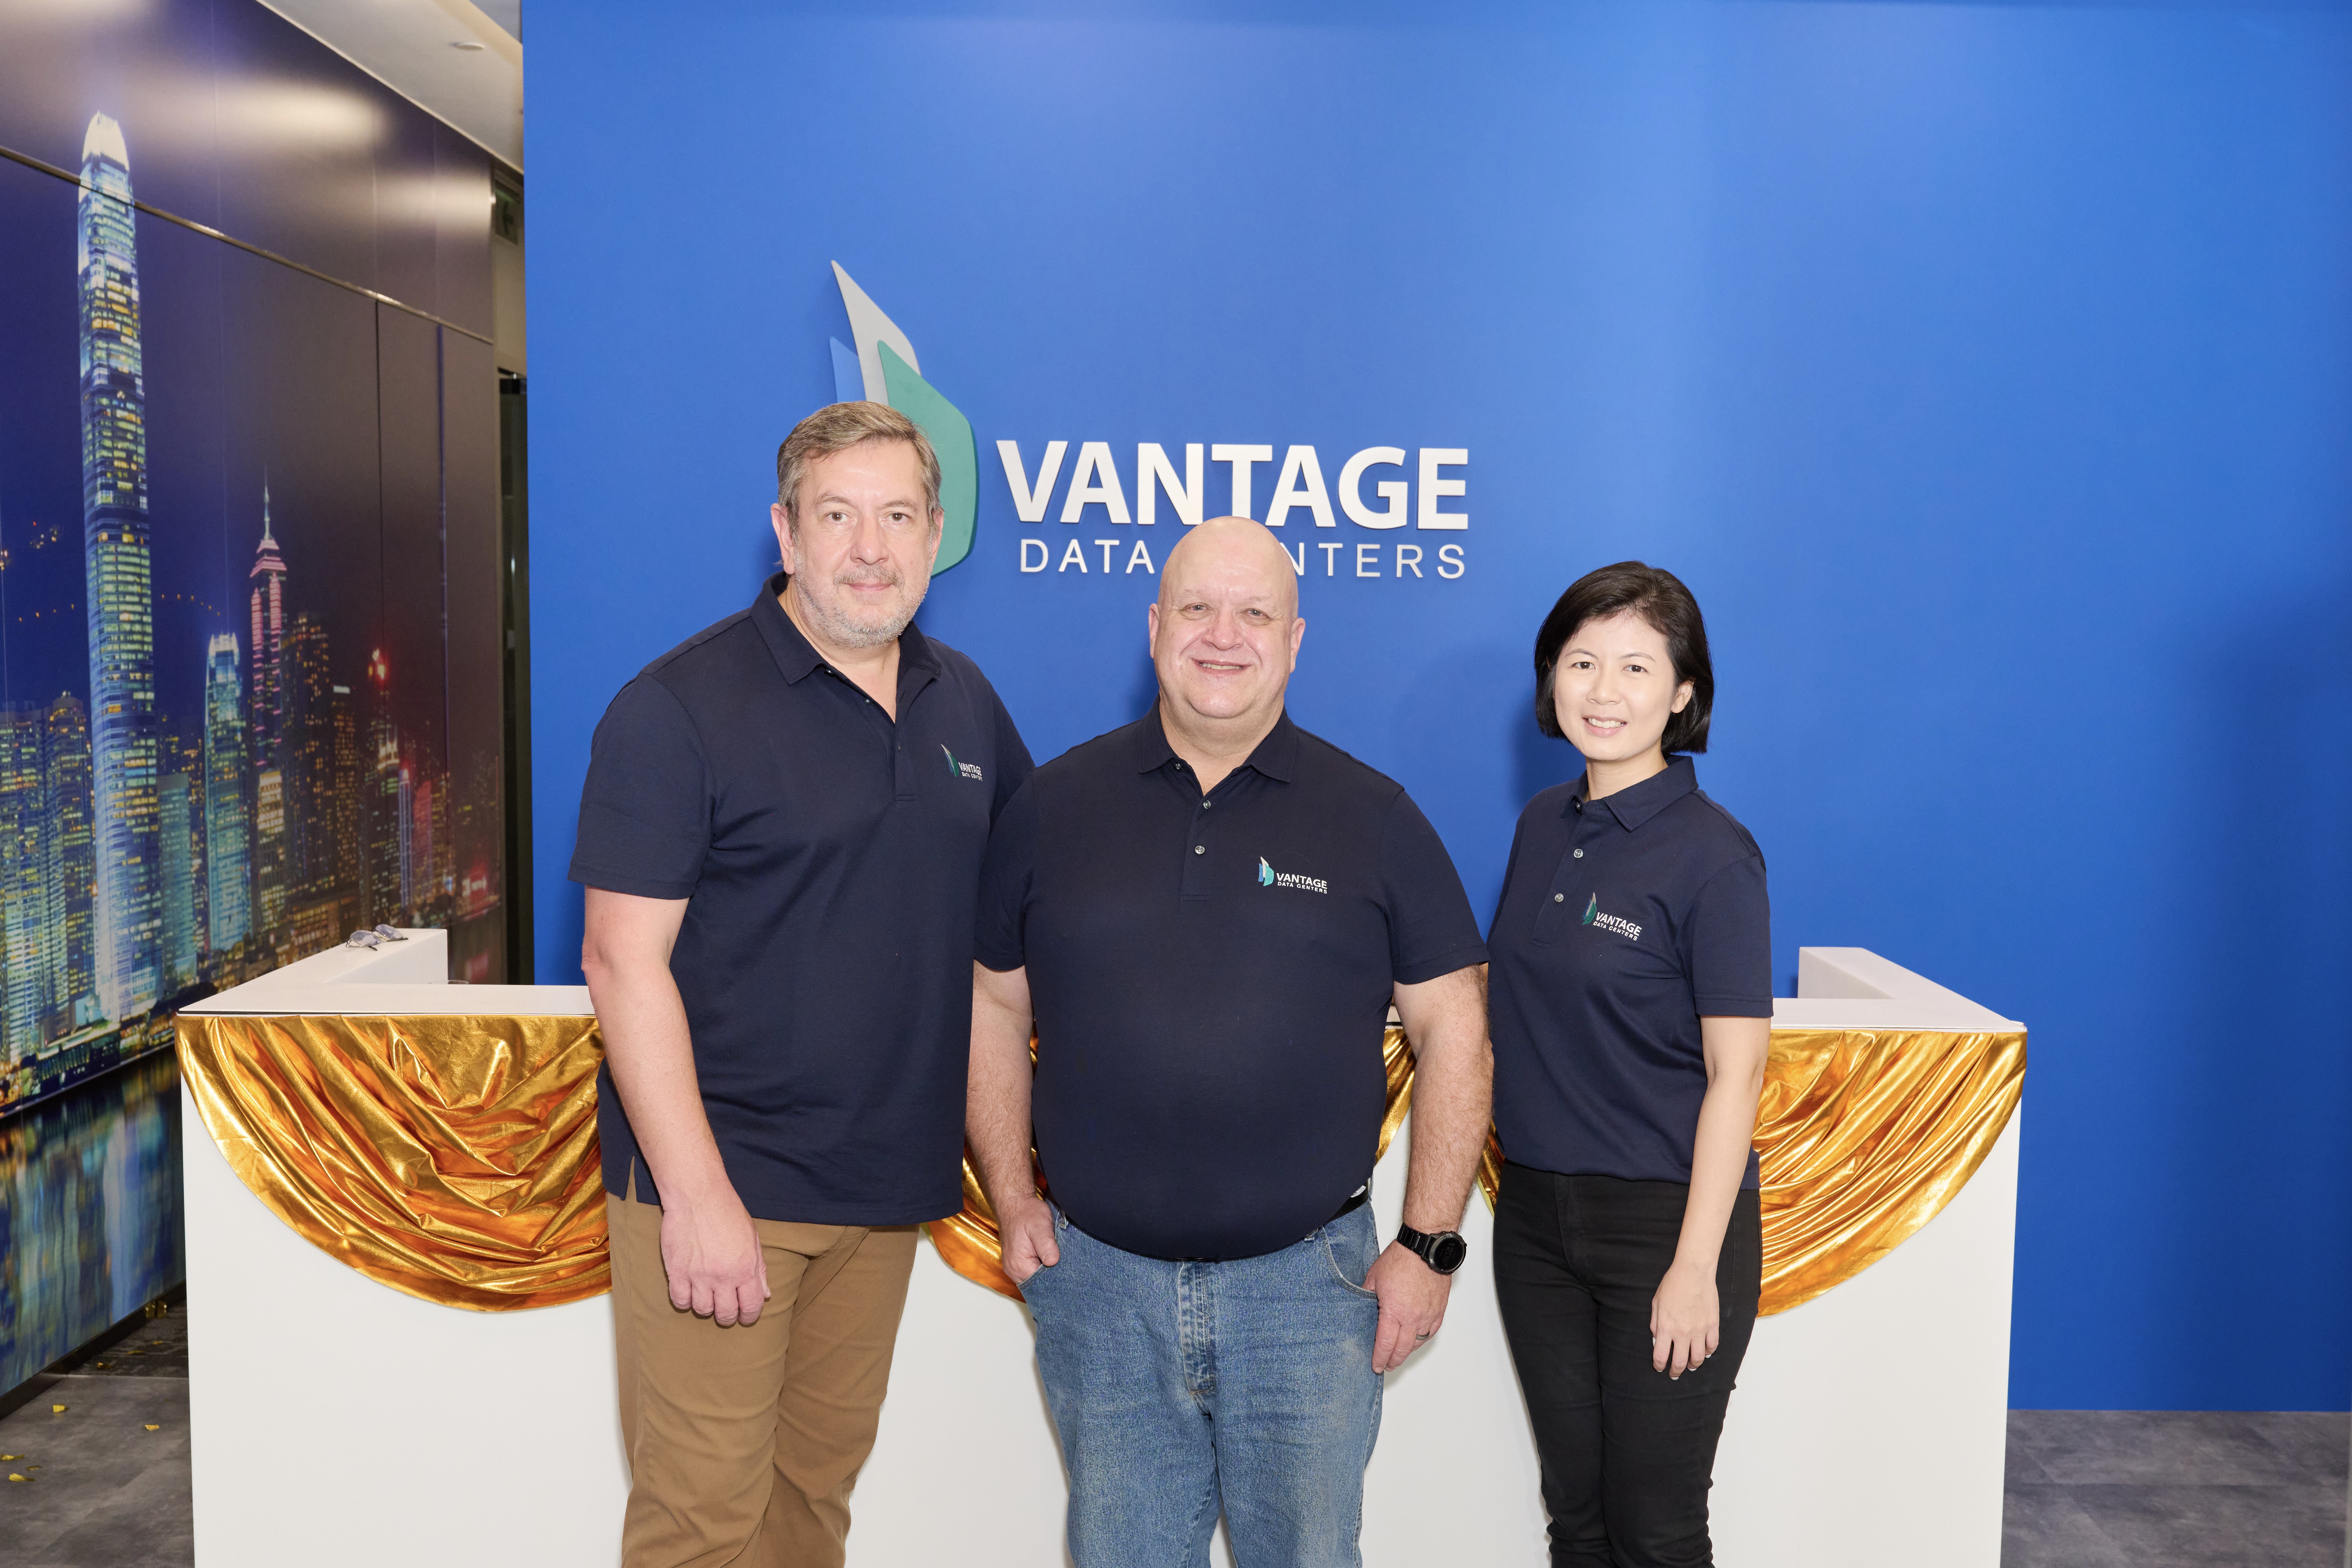 (from left to right) Giles Proctor (COO of Vantage Data Centers APAC), Chris Yetman (COO of Vantage Data Centers), and Corinne Chong (CFO of Vantage Data Centers APAC) officiate at the Vantage Data Centers Hong Kong Office Opening Ceremony